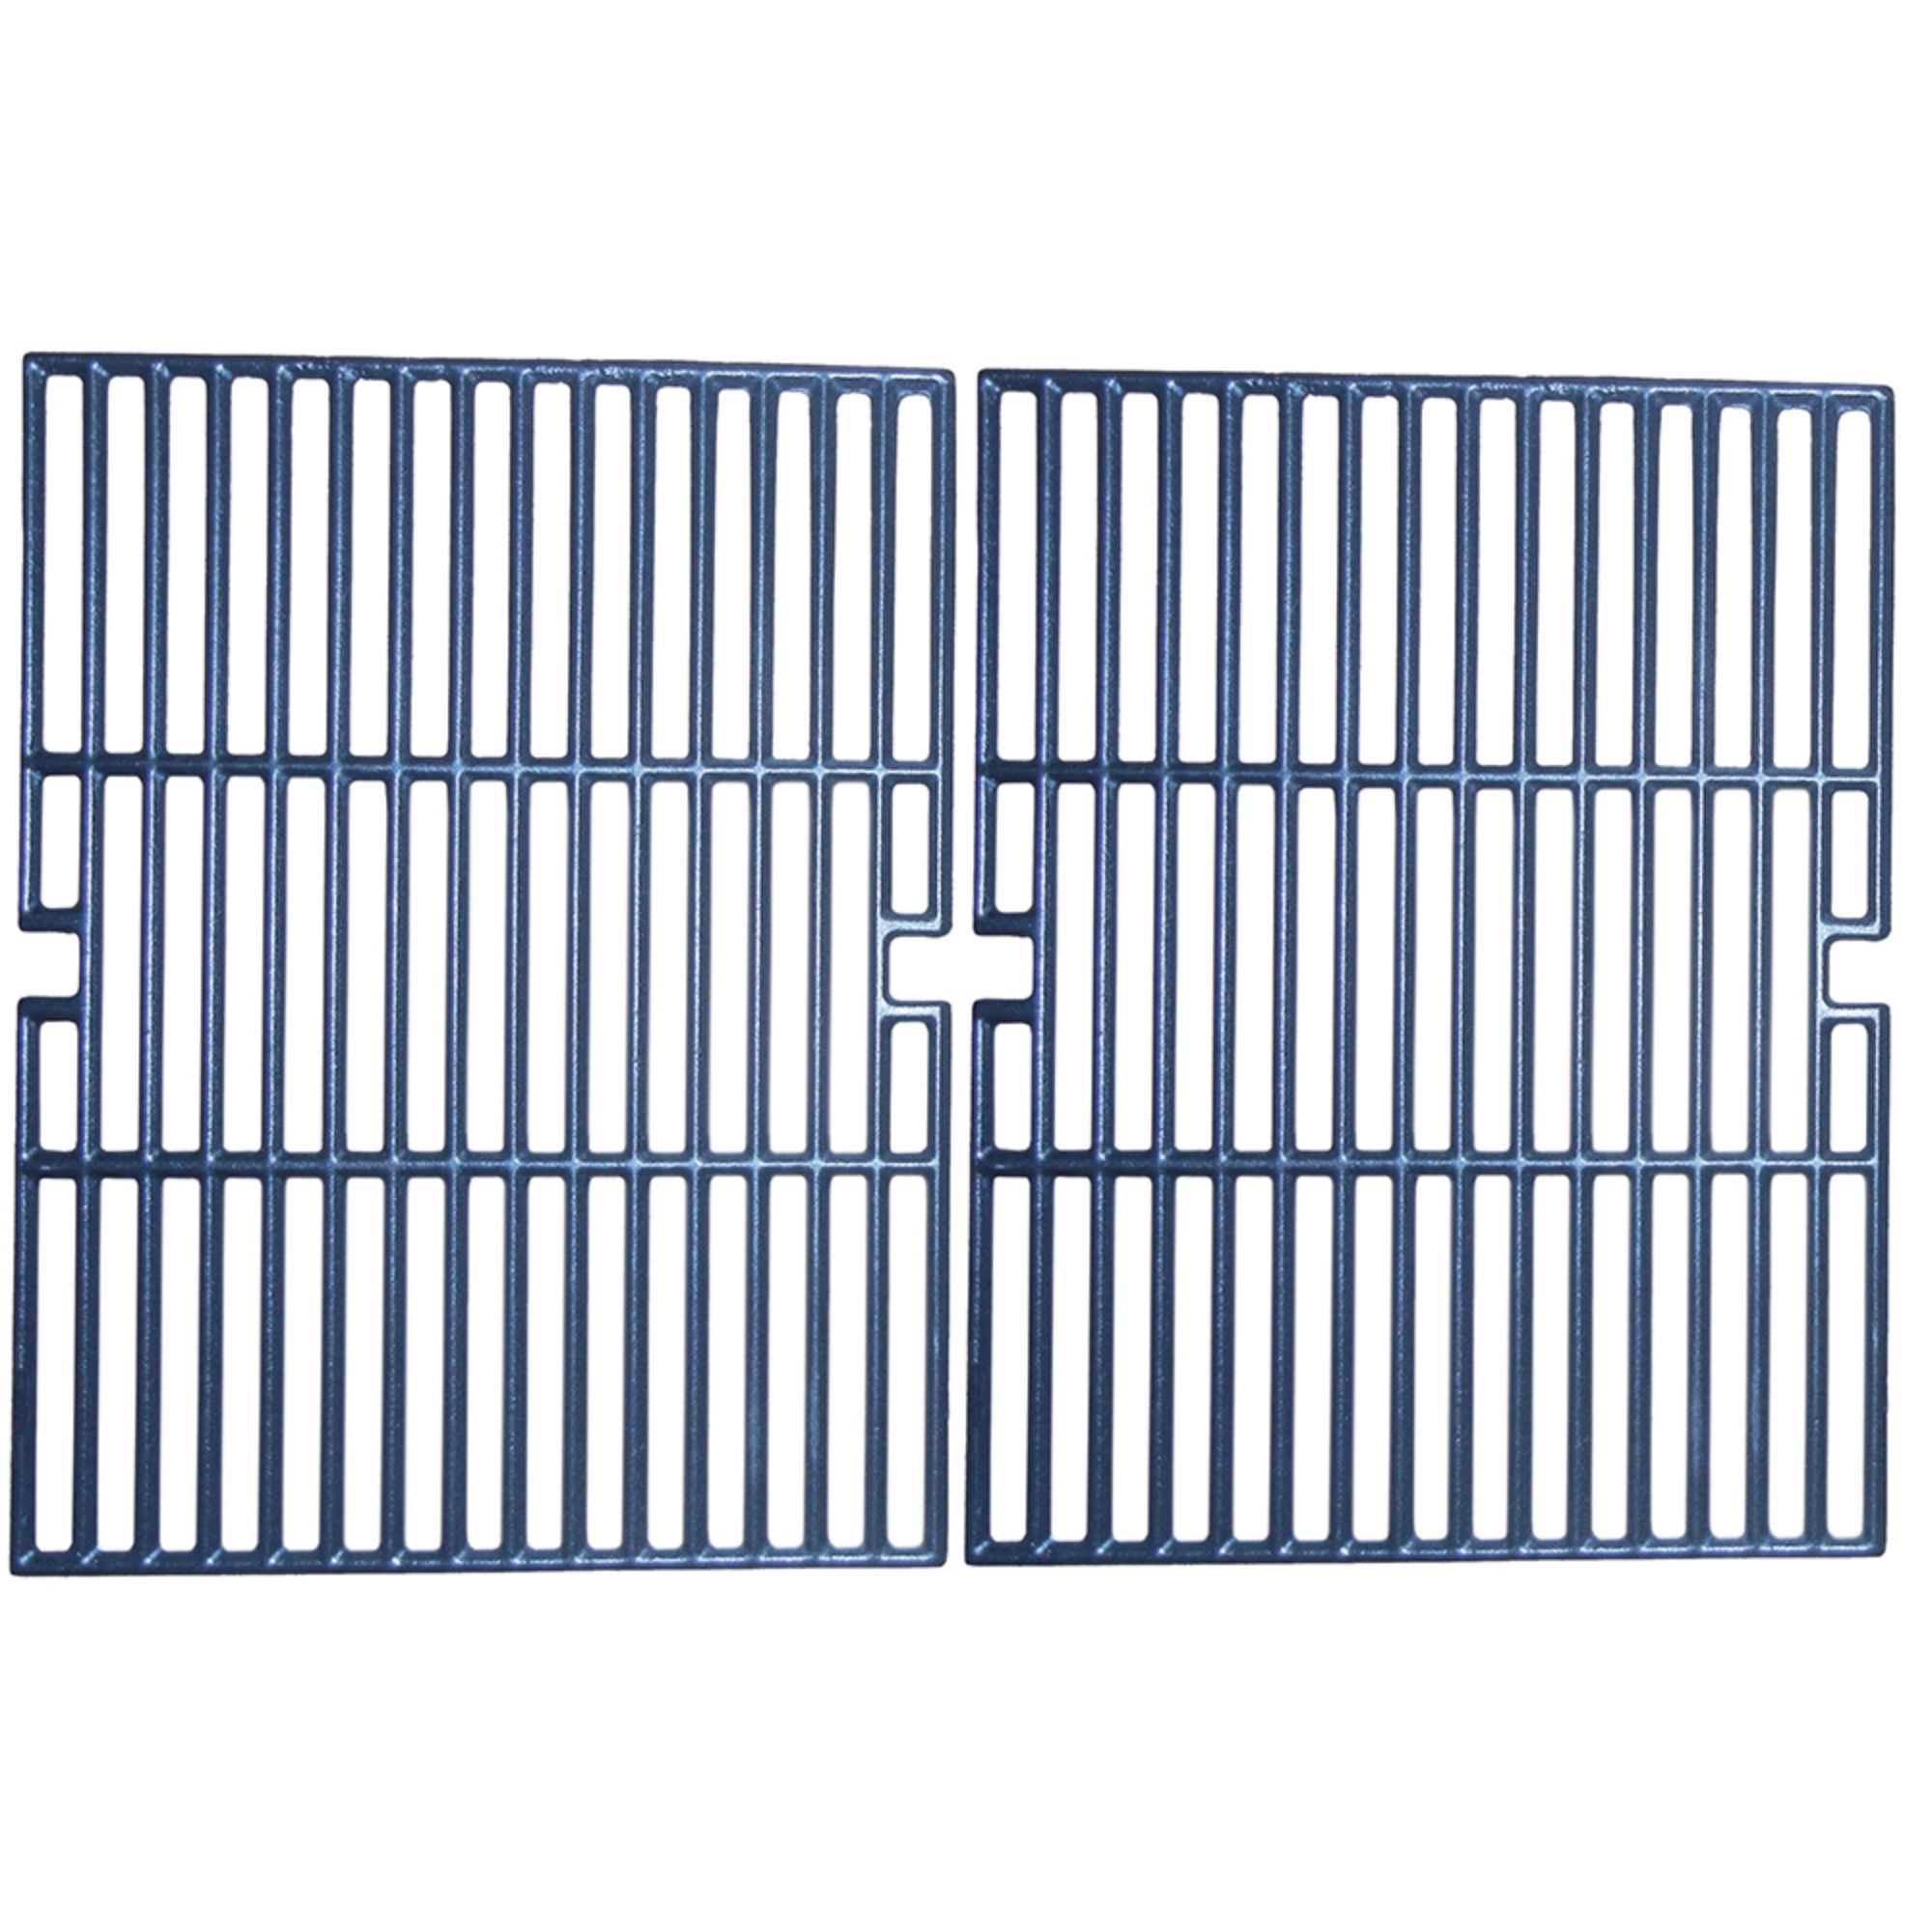 Matte cast iron cooking grid for Kenmore, Permasteel brand gas grills